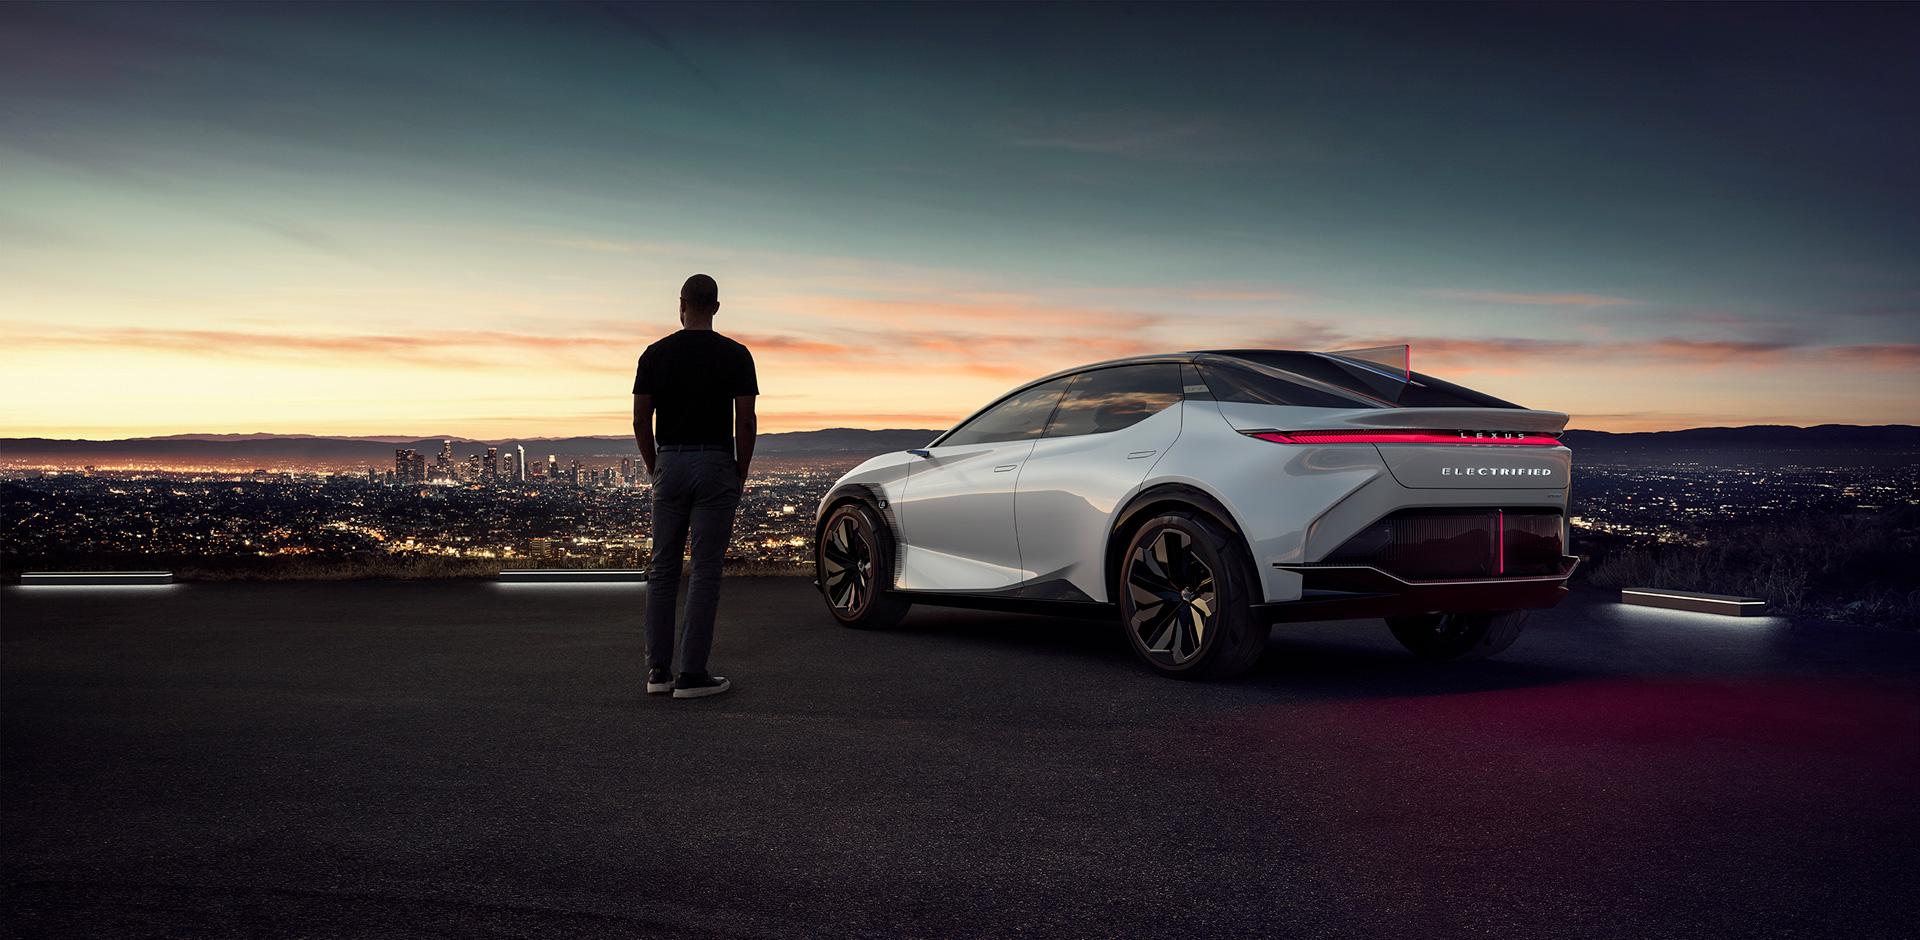 Lexus is taking a new design approach to its electric vehicles